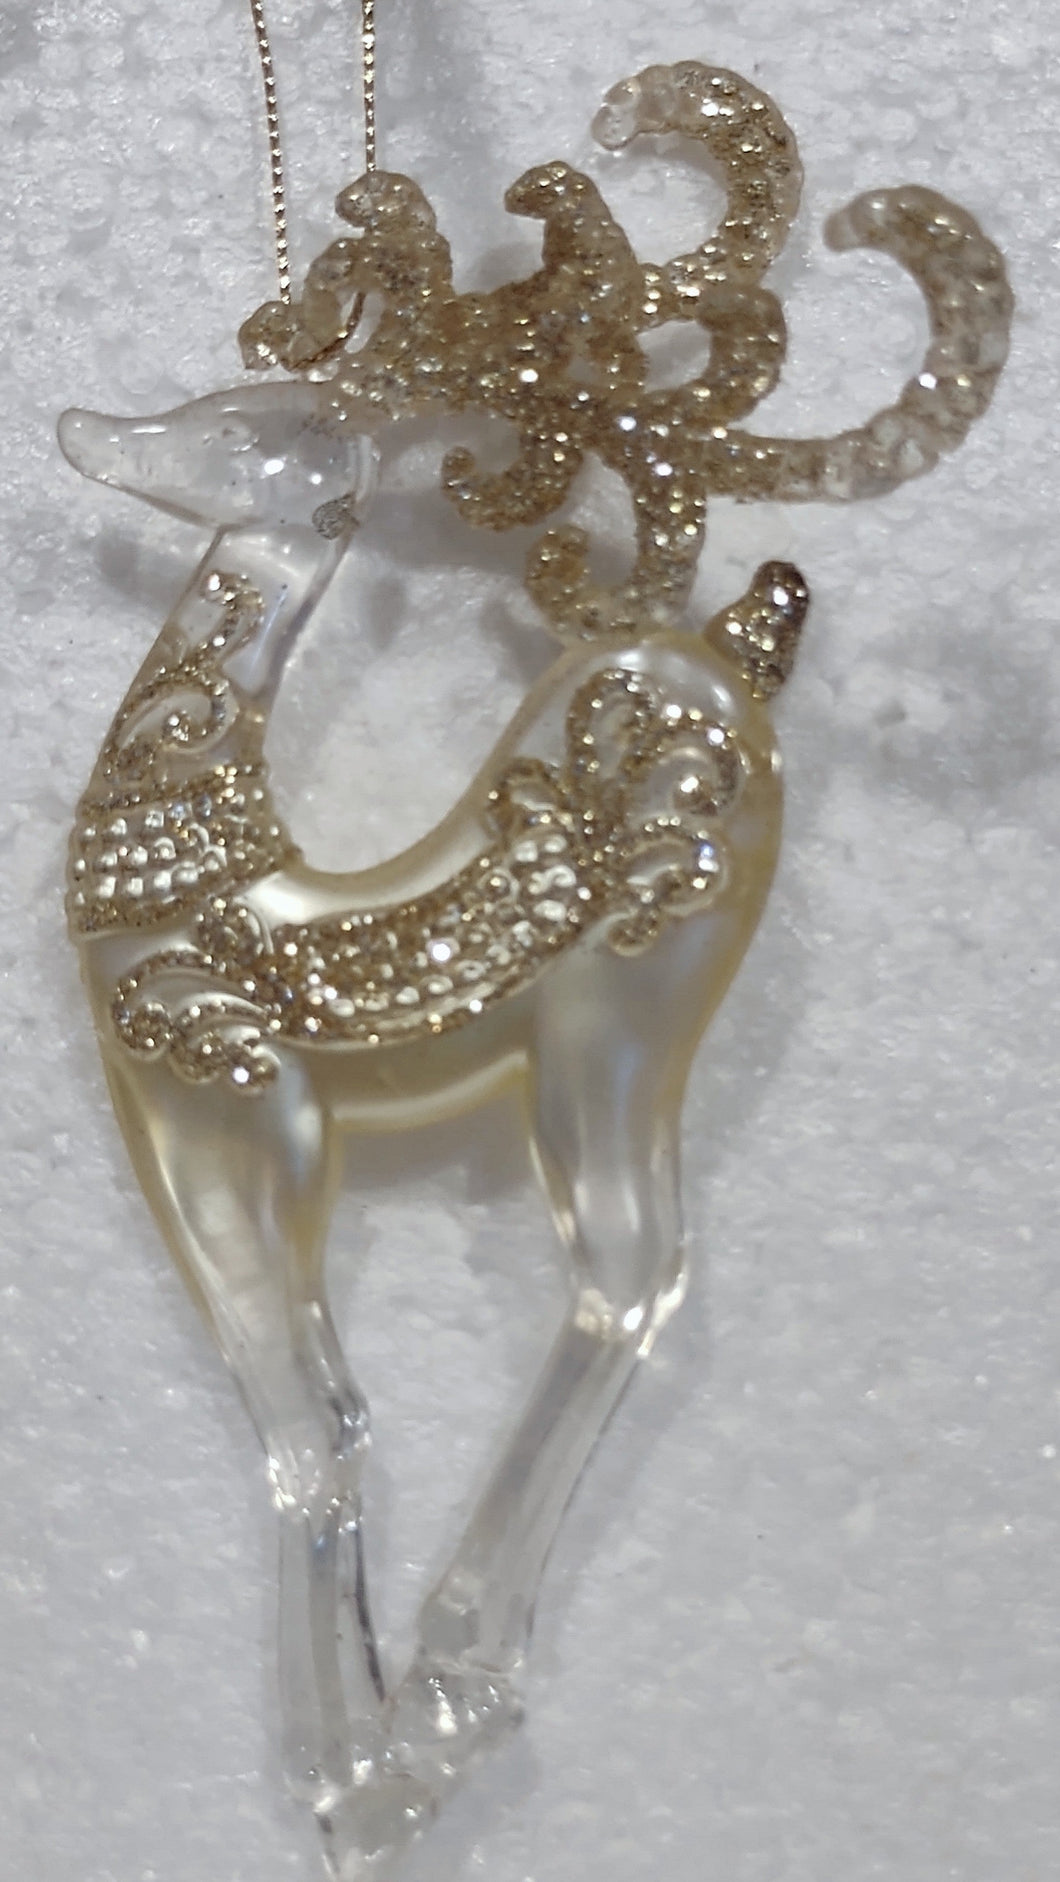 Acrylic Gold Reindeer Ornament with Gold Design & Glitter 5